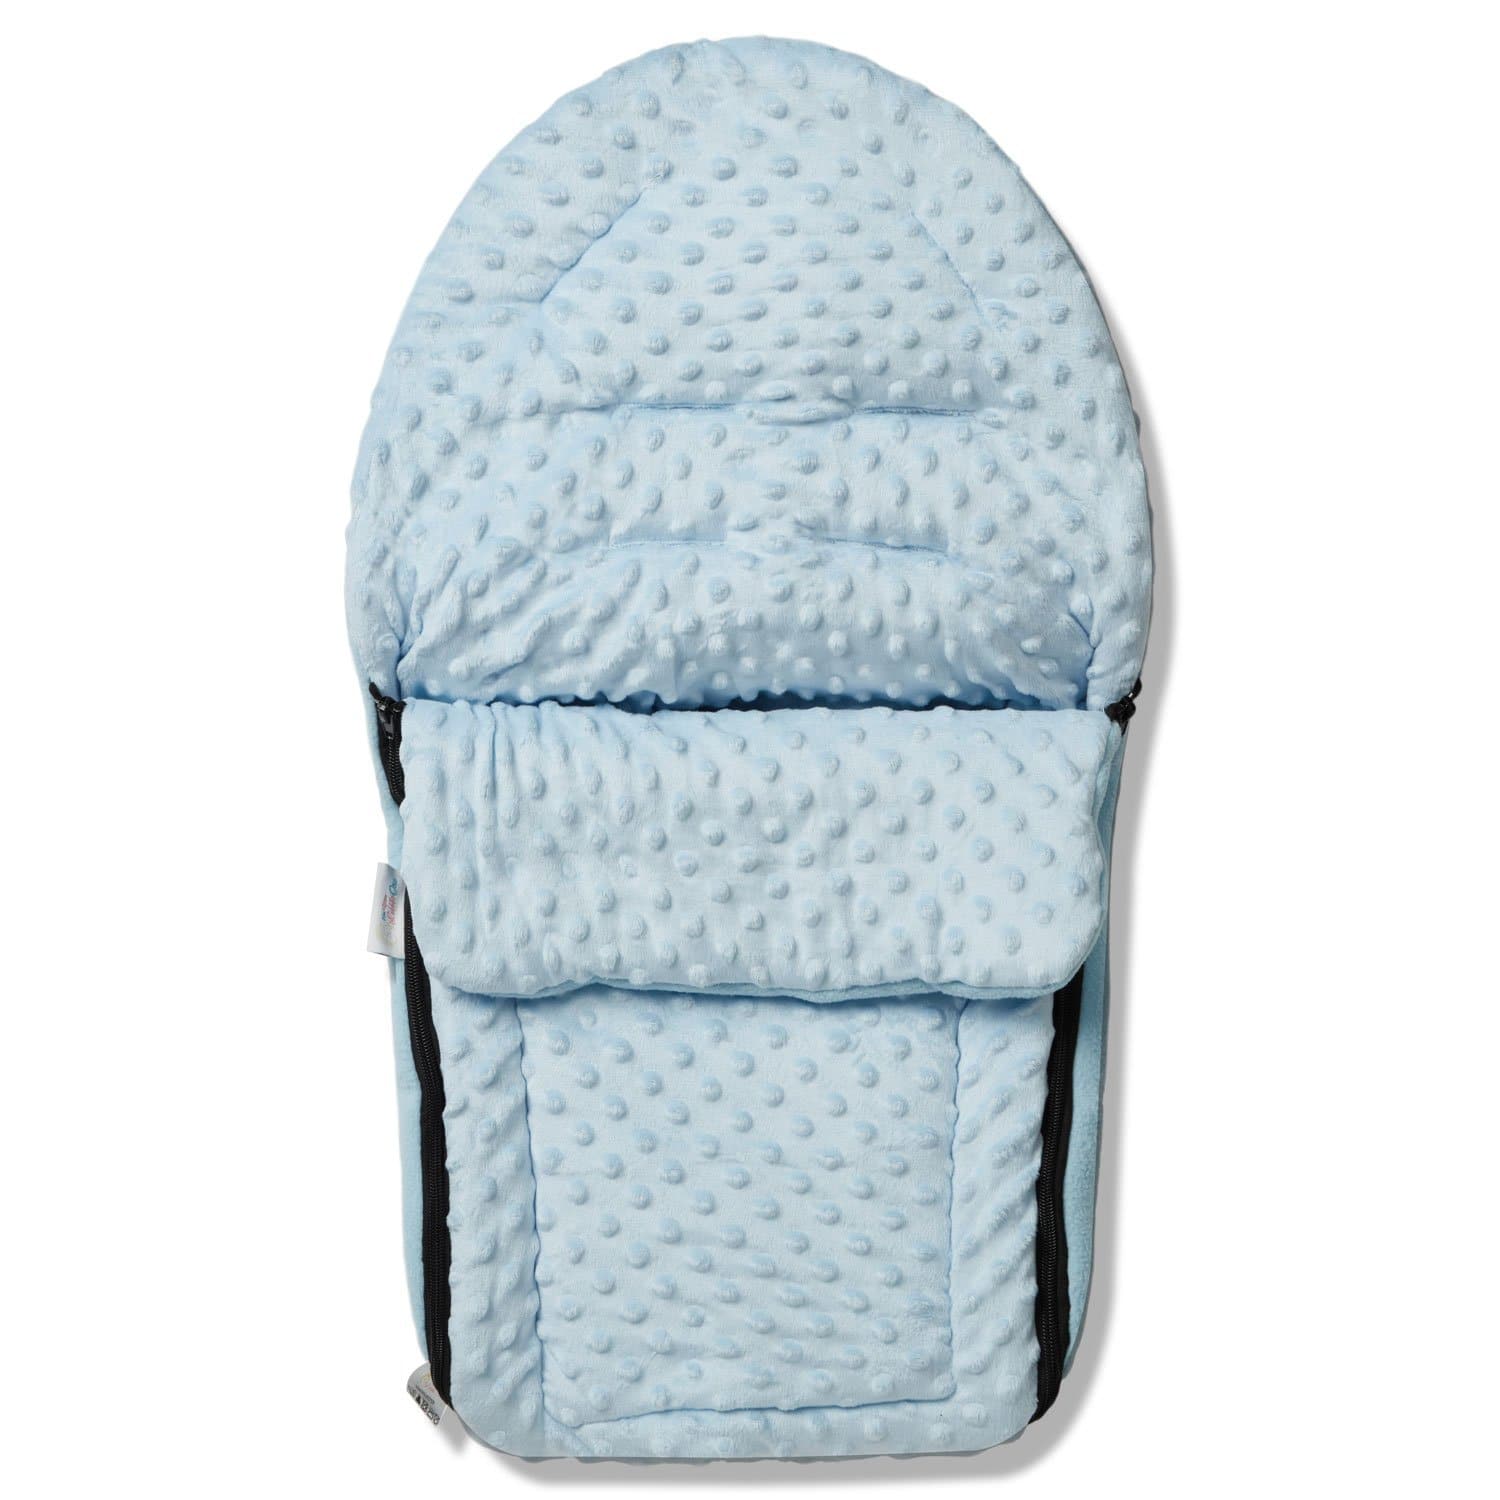 Dimple Car Seat Footmuff / Cosy Toes Compatible with Red Kite - Blue / Fits All Models | For Your Little One